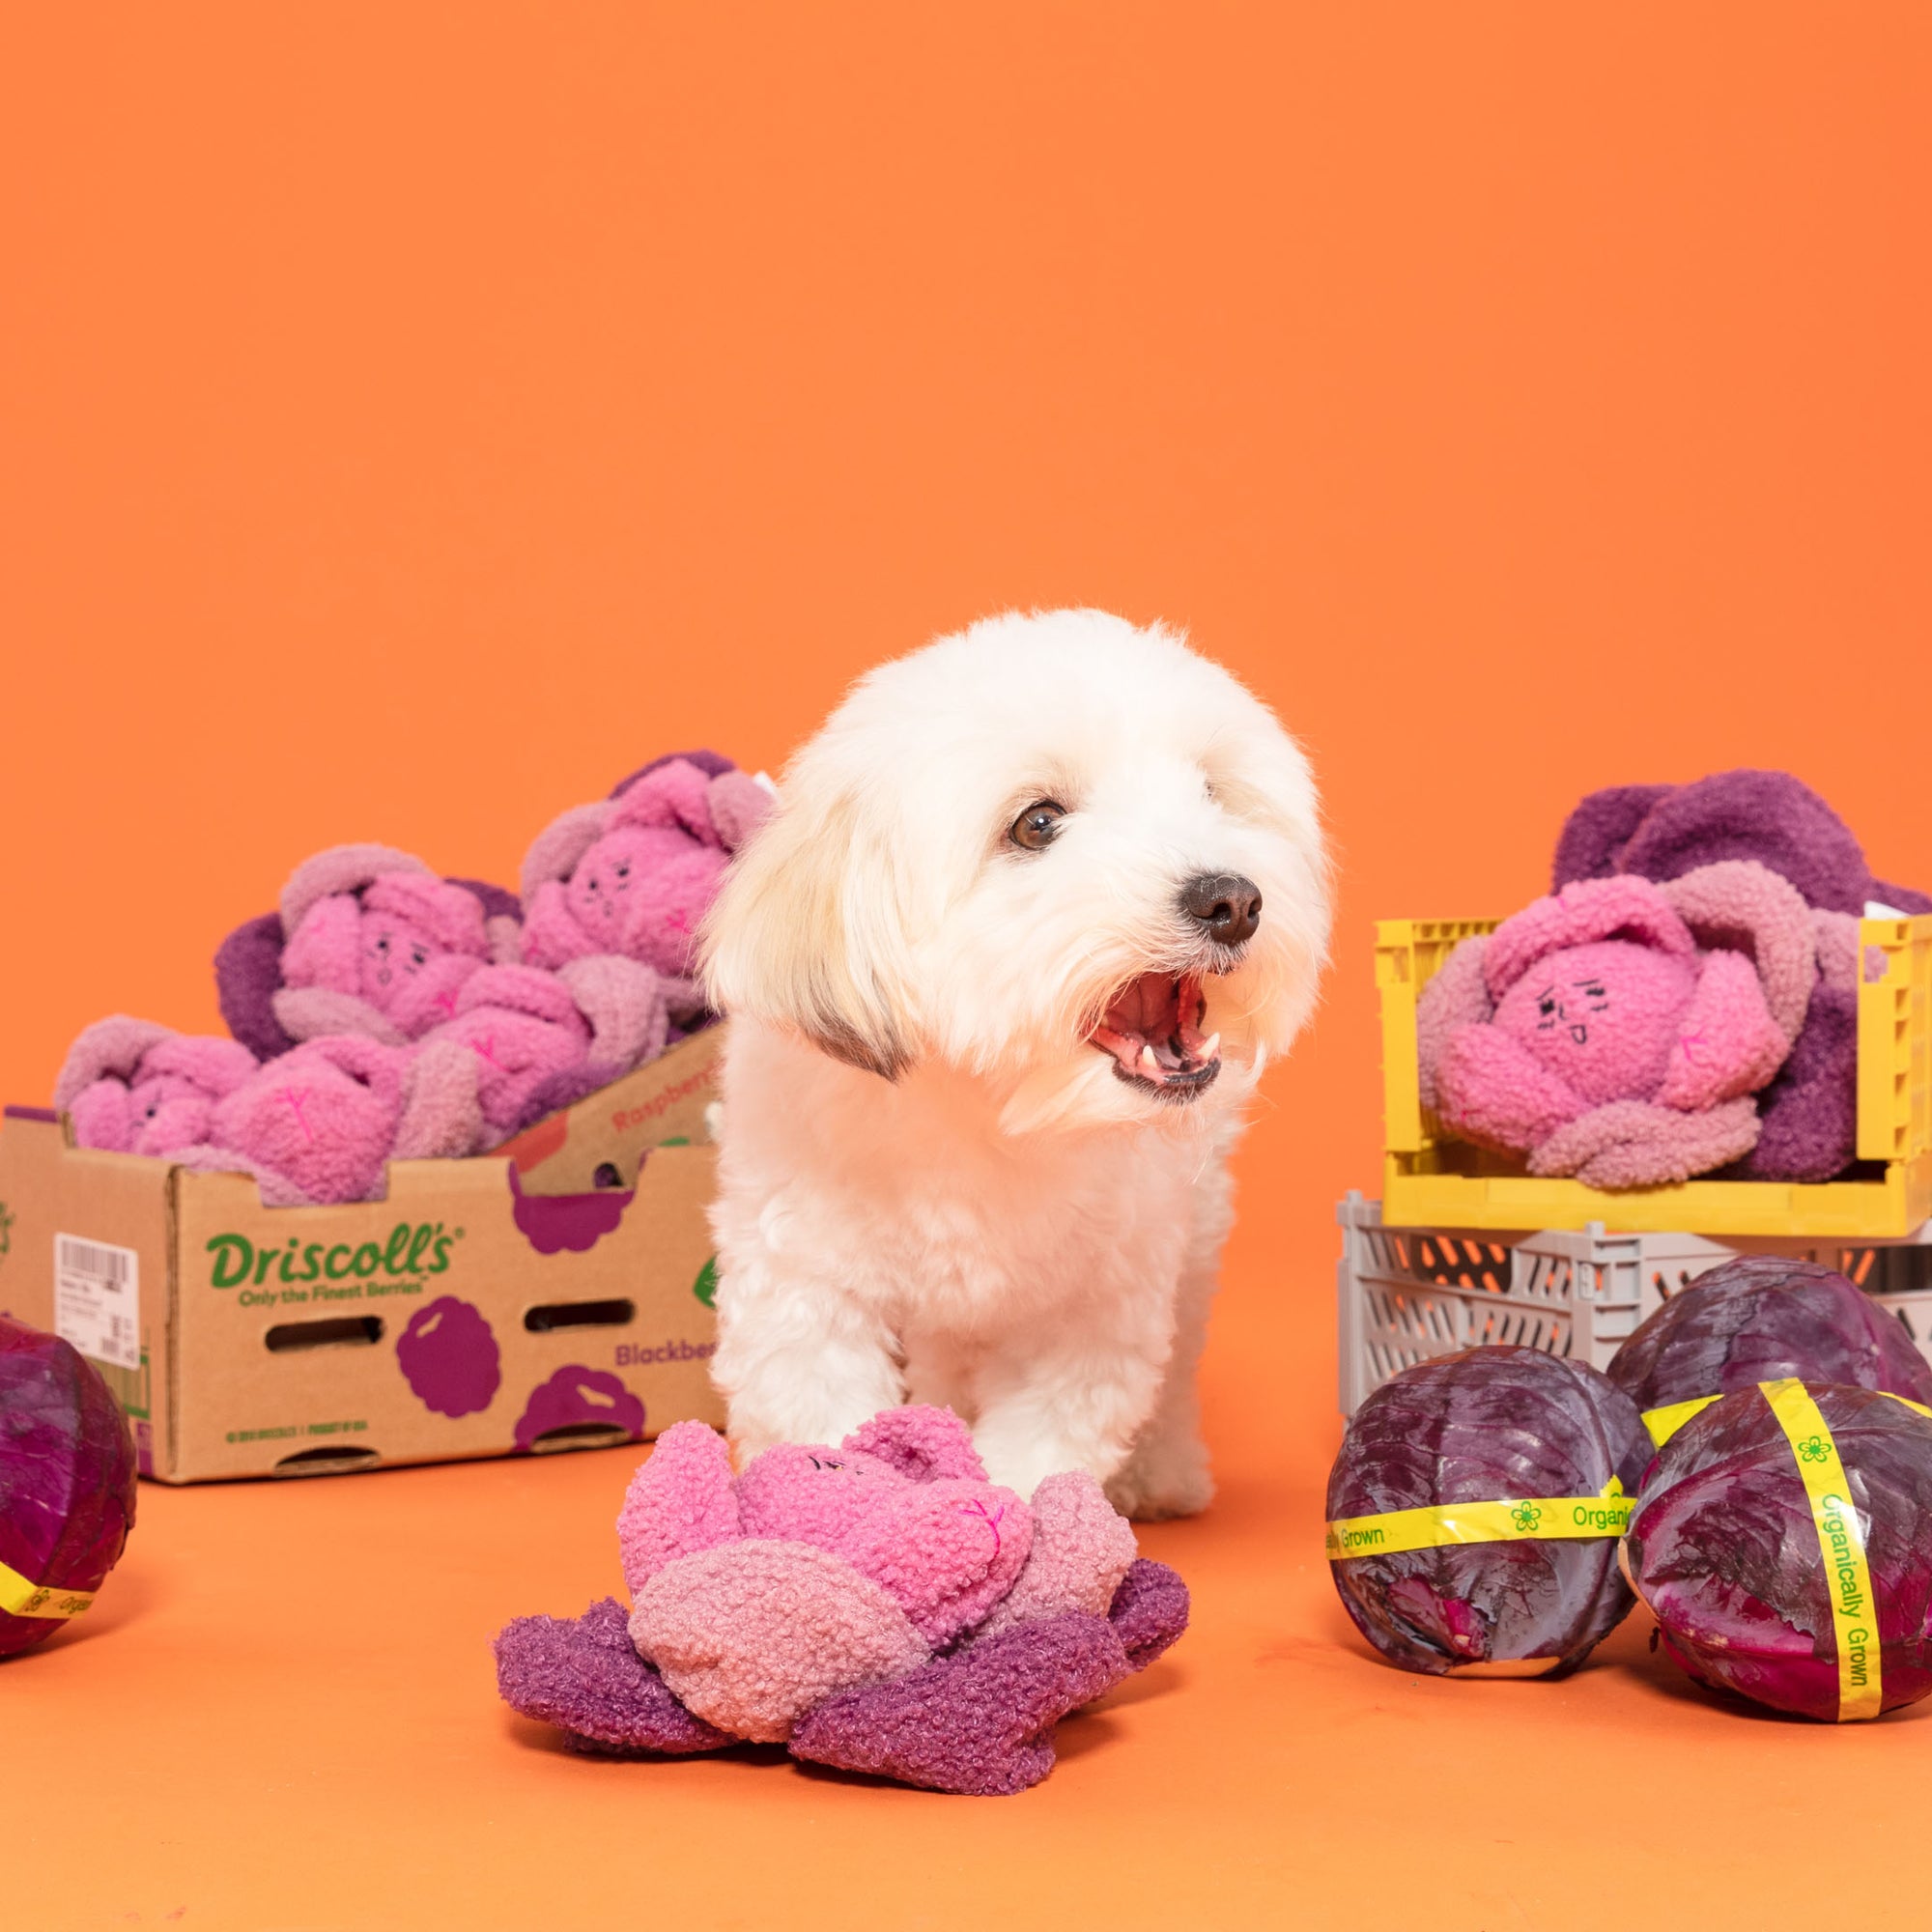 The image shows a white fluffy dog with plush Red Cabbage toys and real cabbages, set against an orange backdrop. The scene creatively juxtaposes the toys with the produce, likely for a playful marketing display emphasizing natural and fun elements for pets.